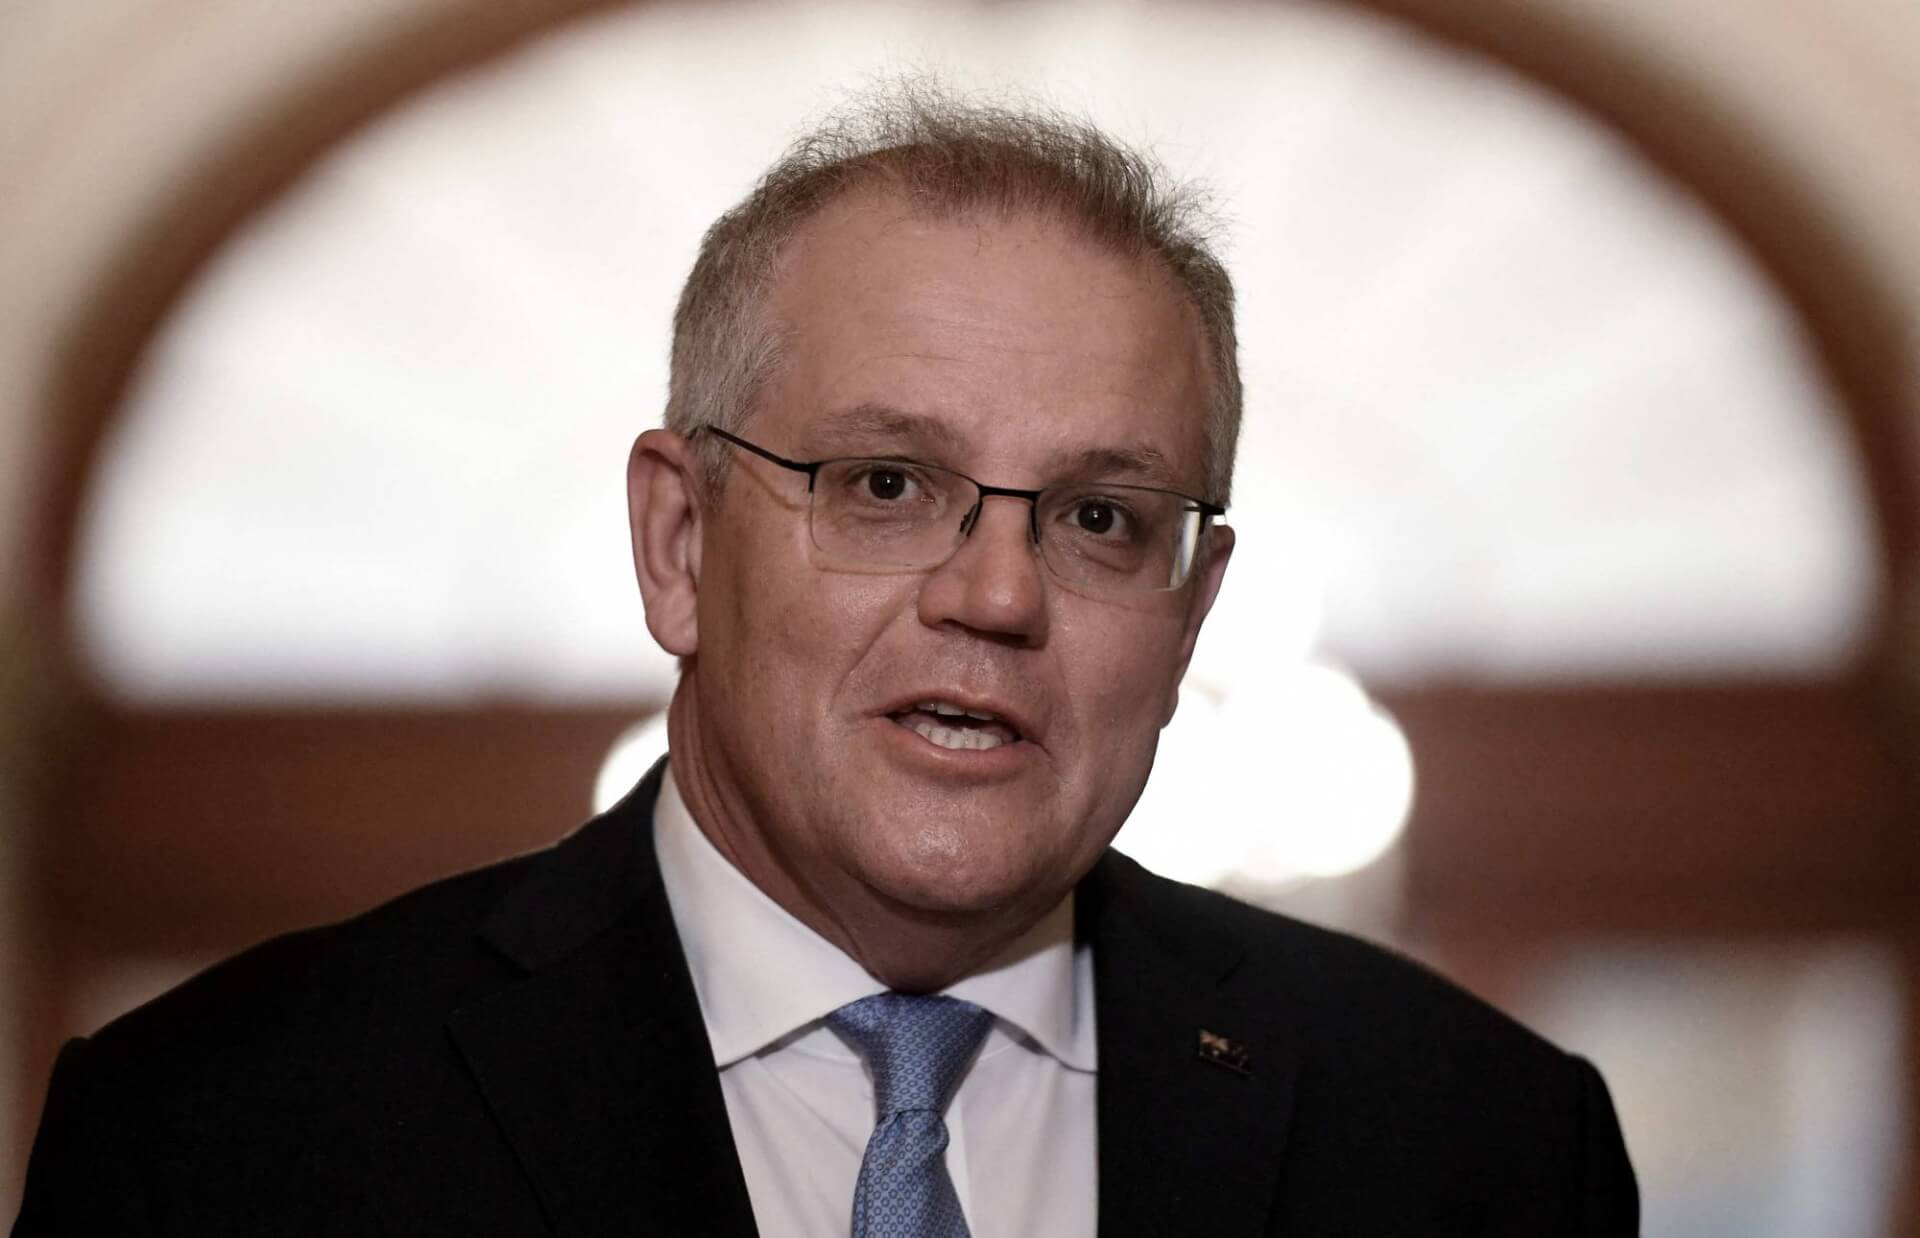 Australian PM Morrison to Push for Social Media Reforms at G20 Summit